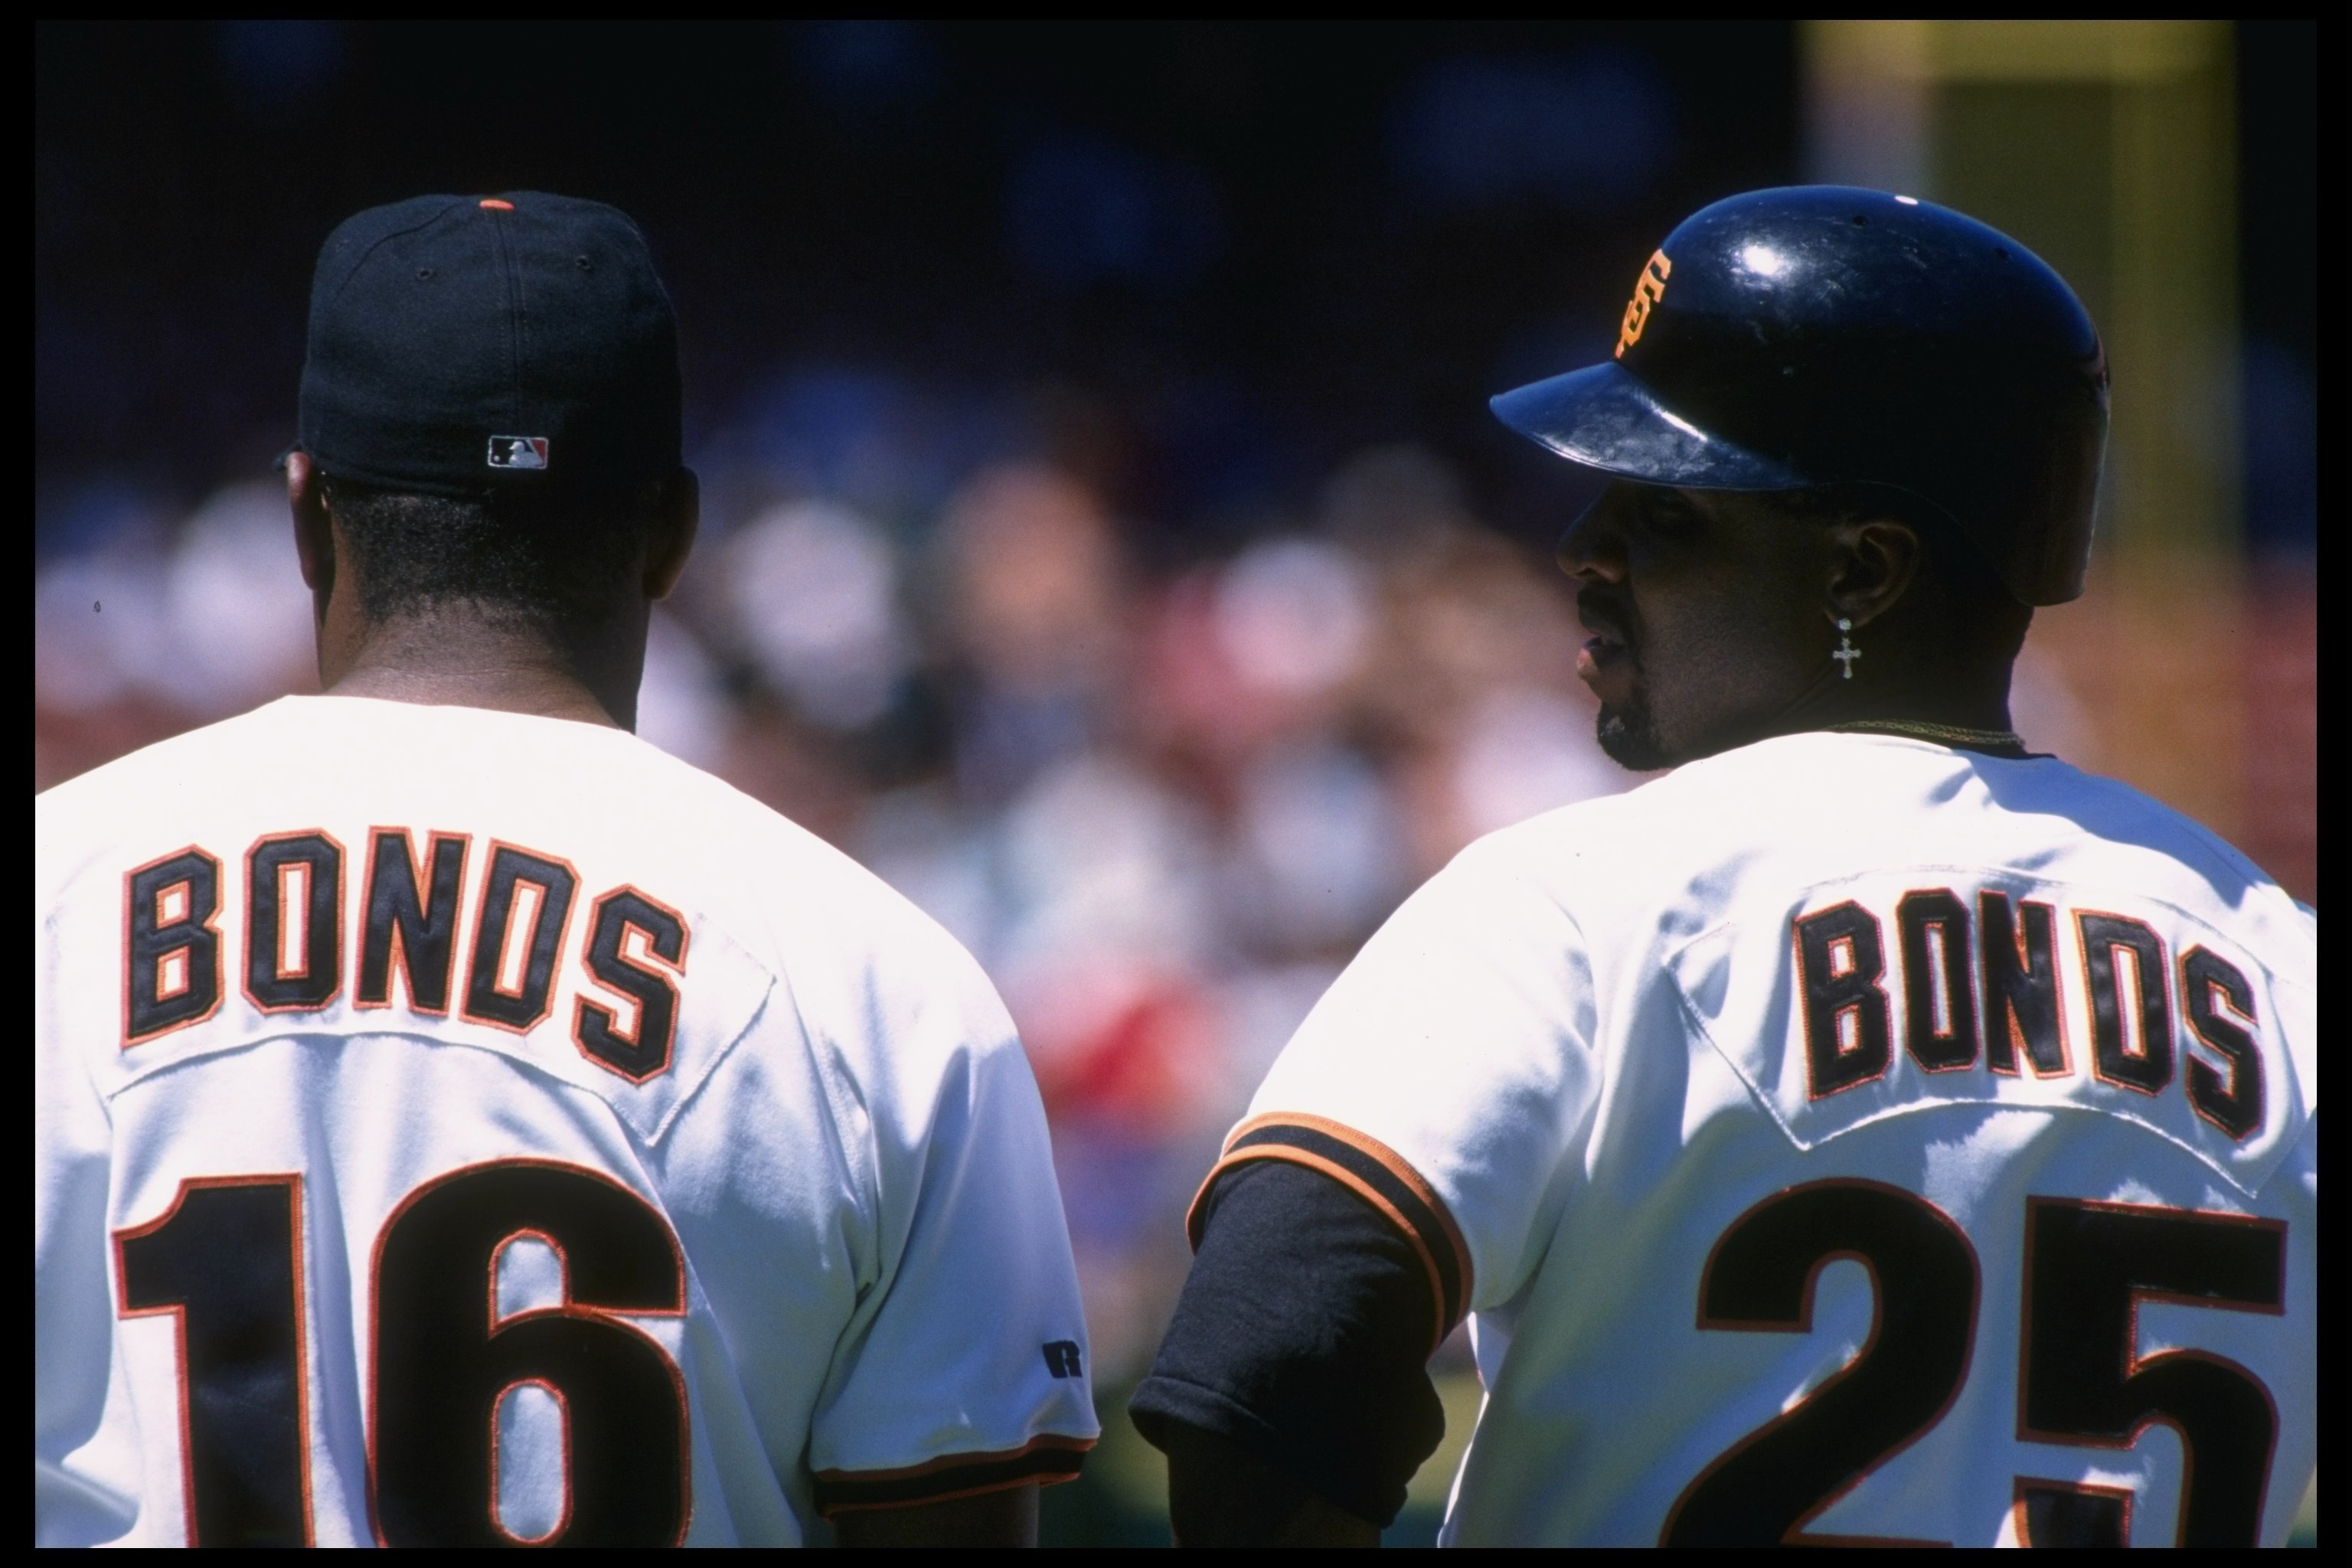 Bonds and Bonds: Barry Set the Father-Son HR Mark in San Francisco